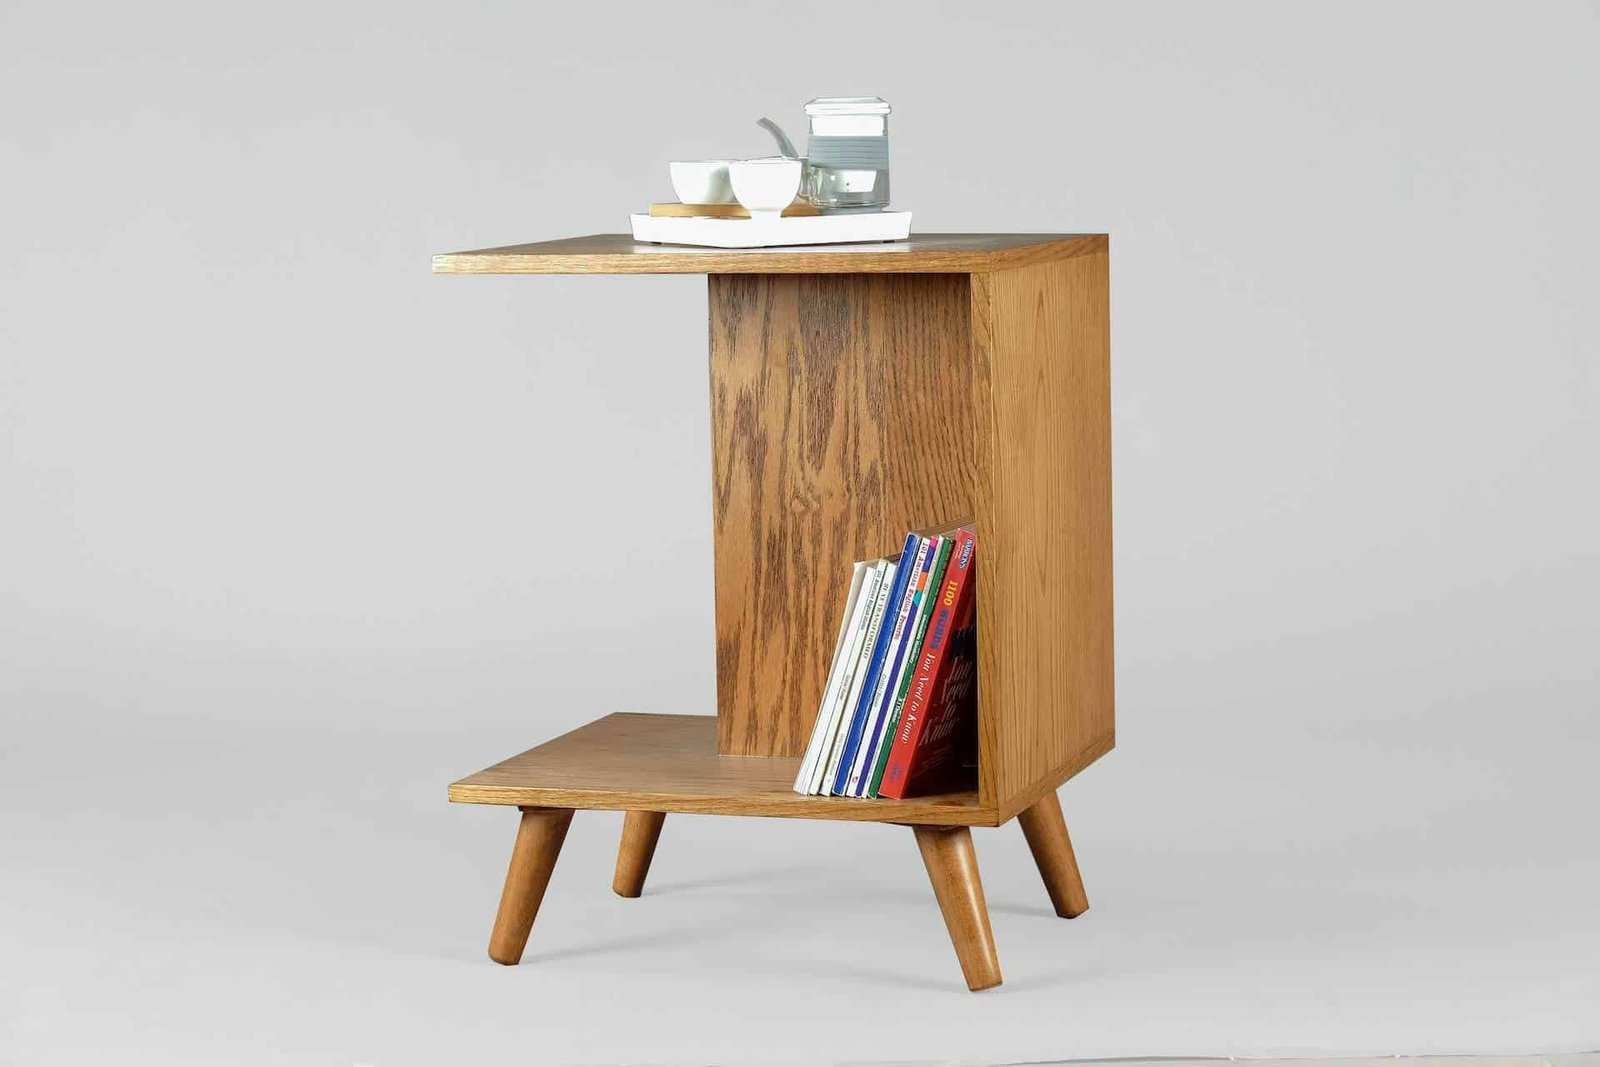 small wood table used for storage